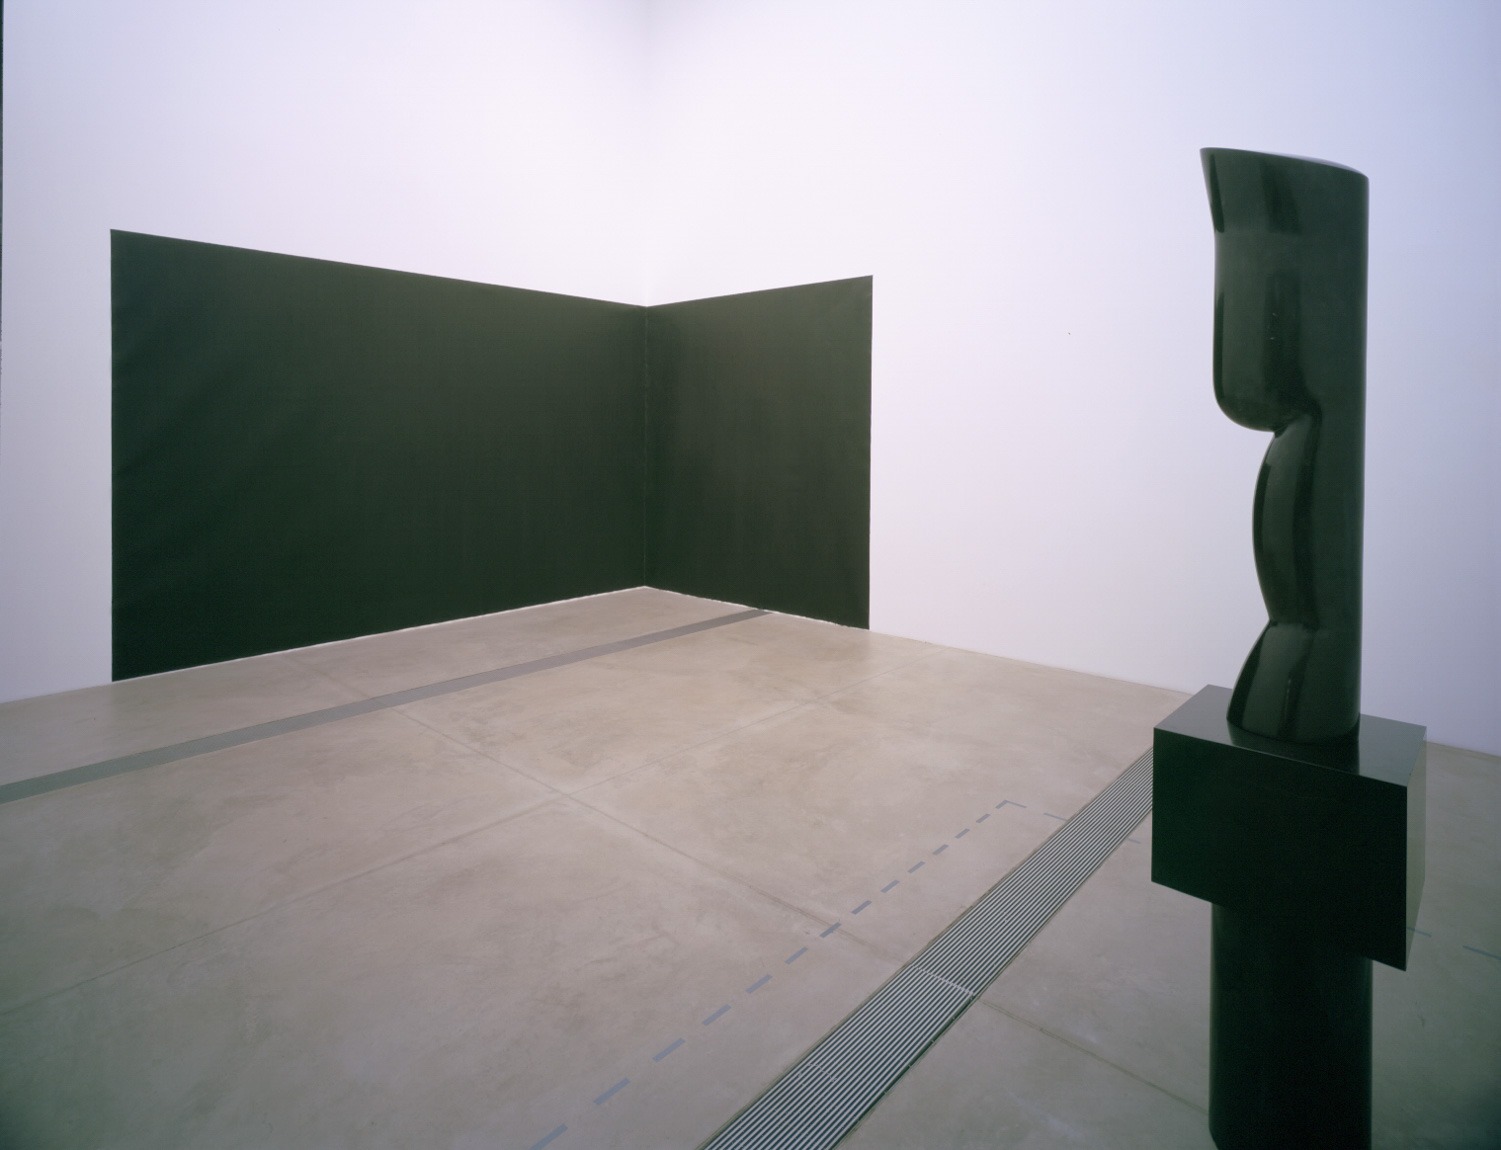 Two pieces stand opposite each other in the Cube Gallery: Serra's "Pacific Judson Murphy," a large black rectangular piece which runs across one wall to another in a corner, and Brâncuși's "Agnes E. Meyer," a tall black marble figure.